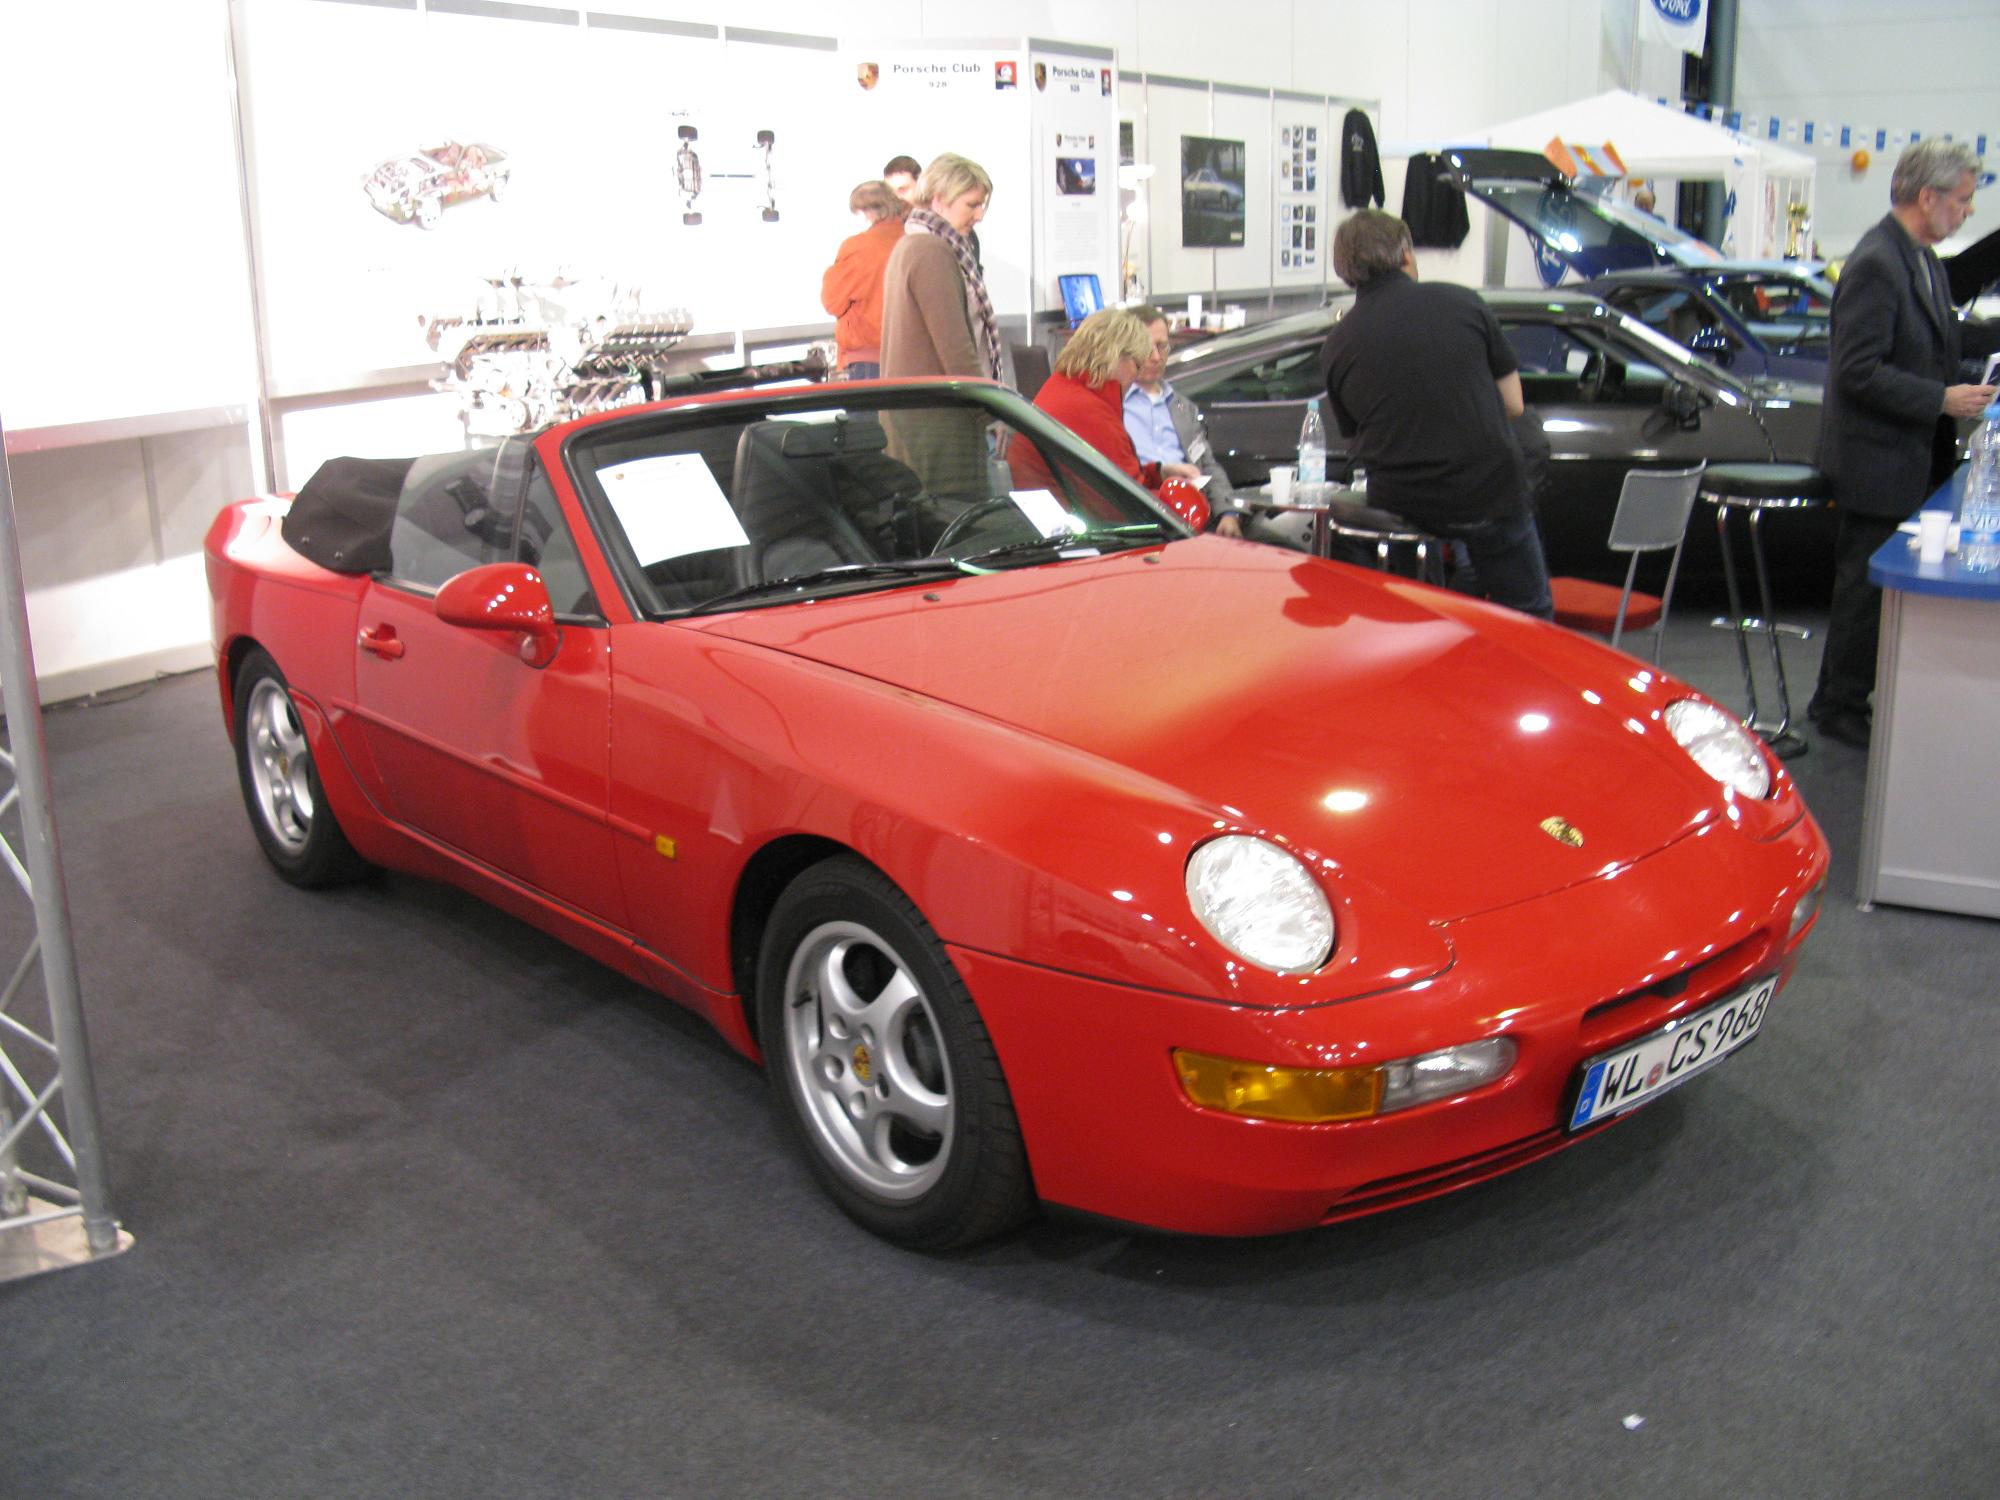 people and a red sports car at an automobile show